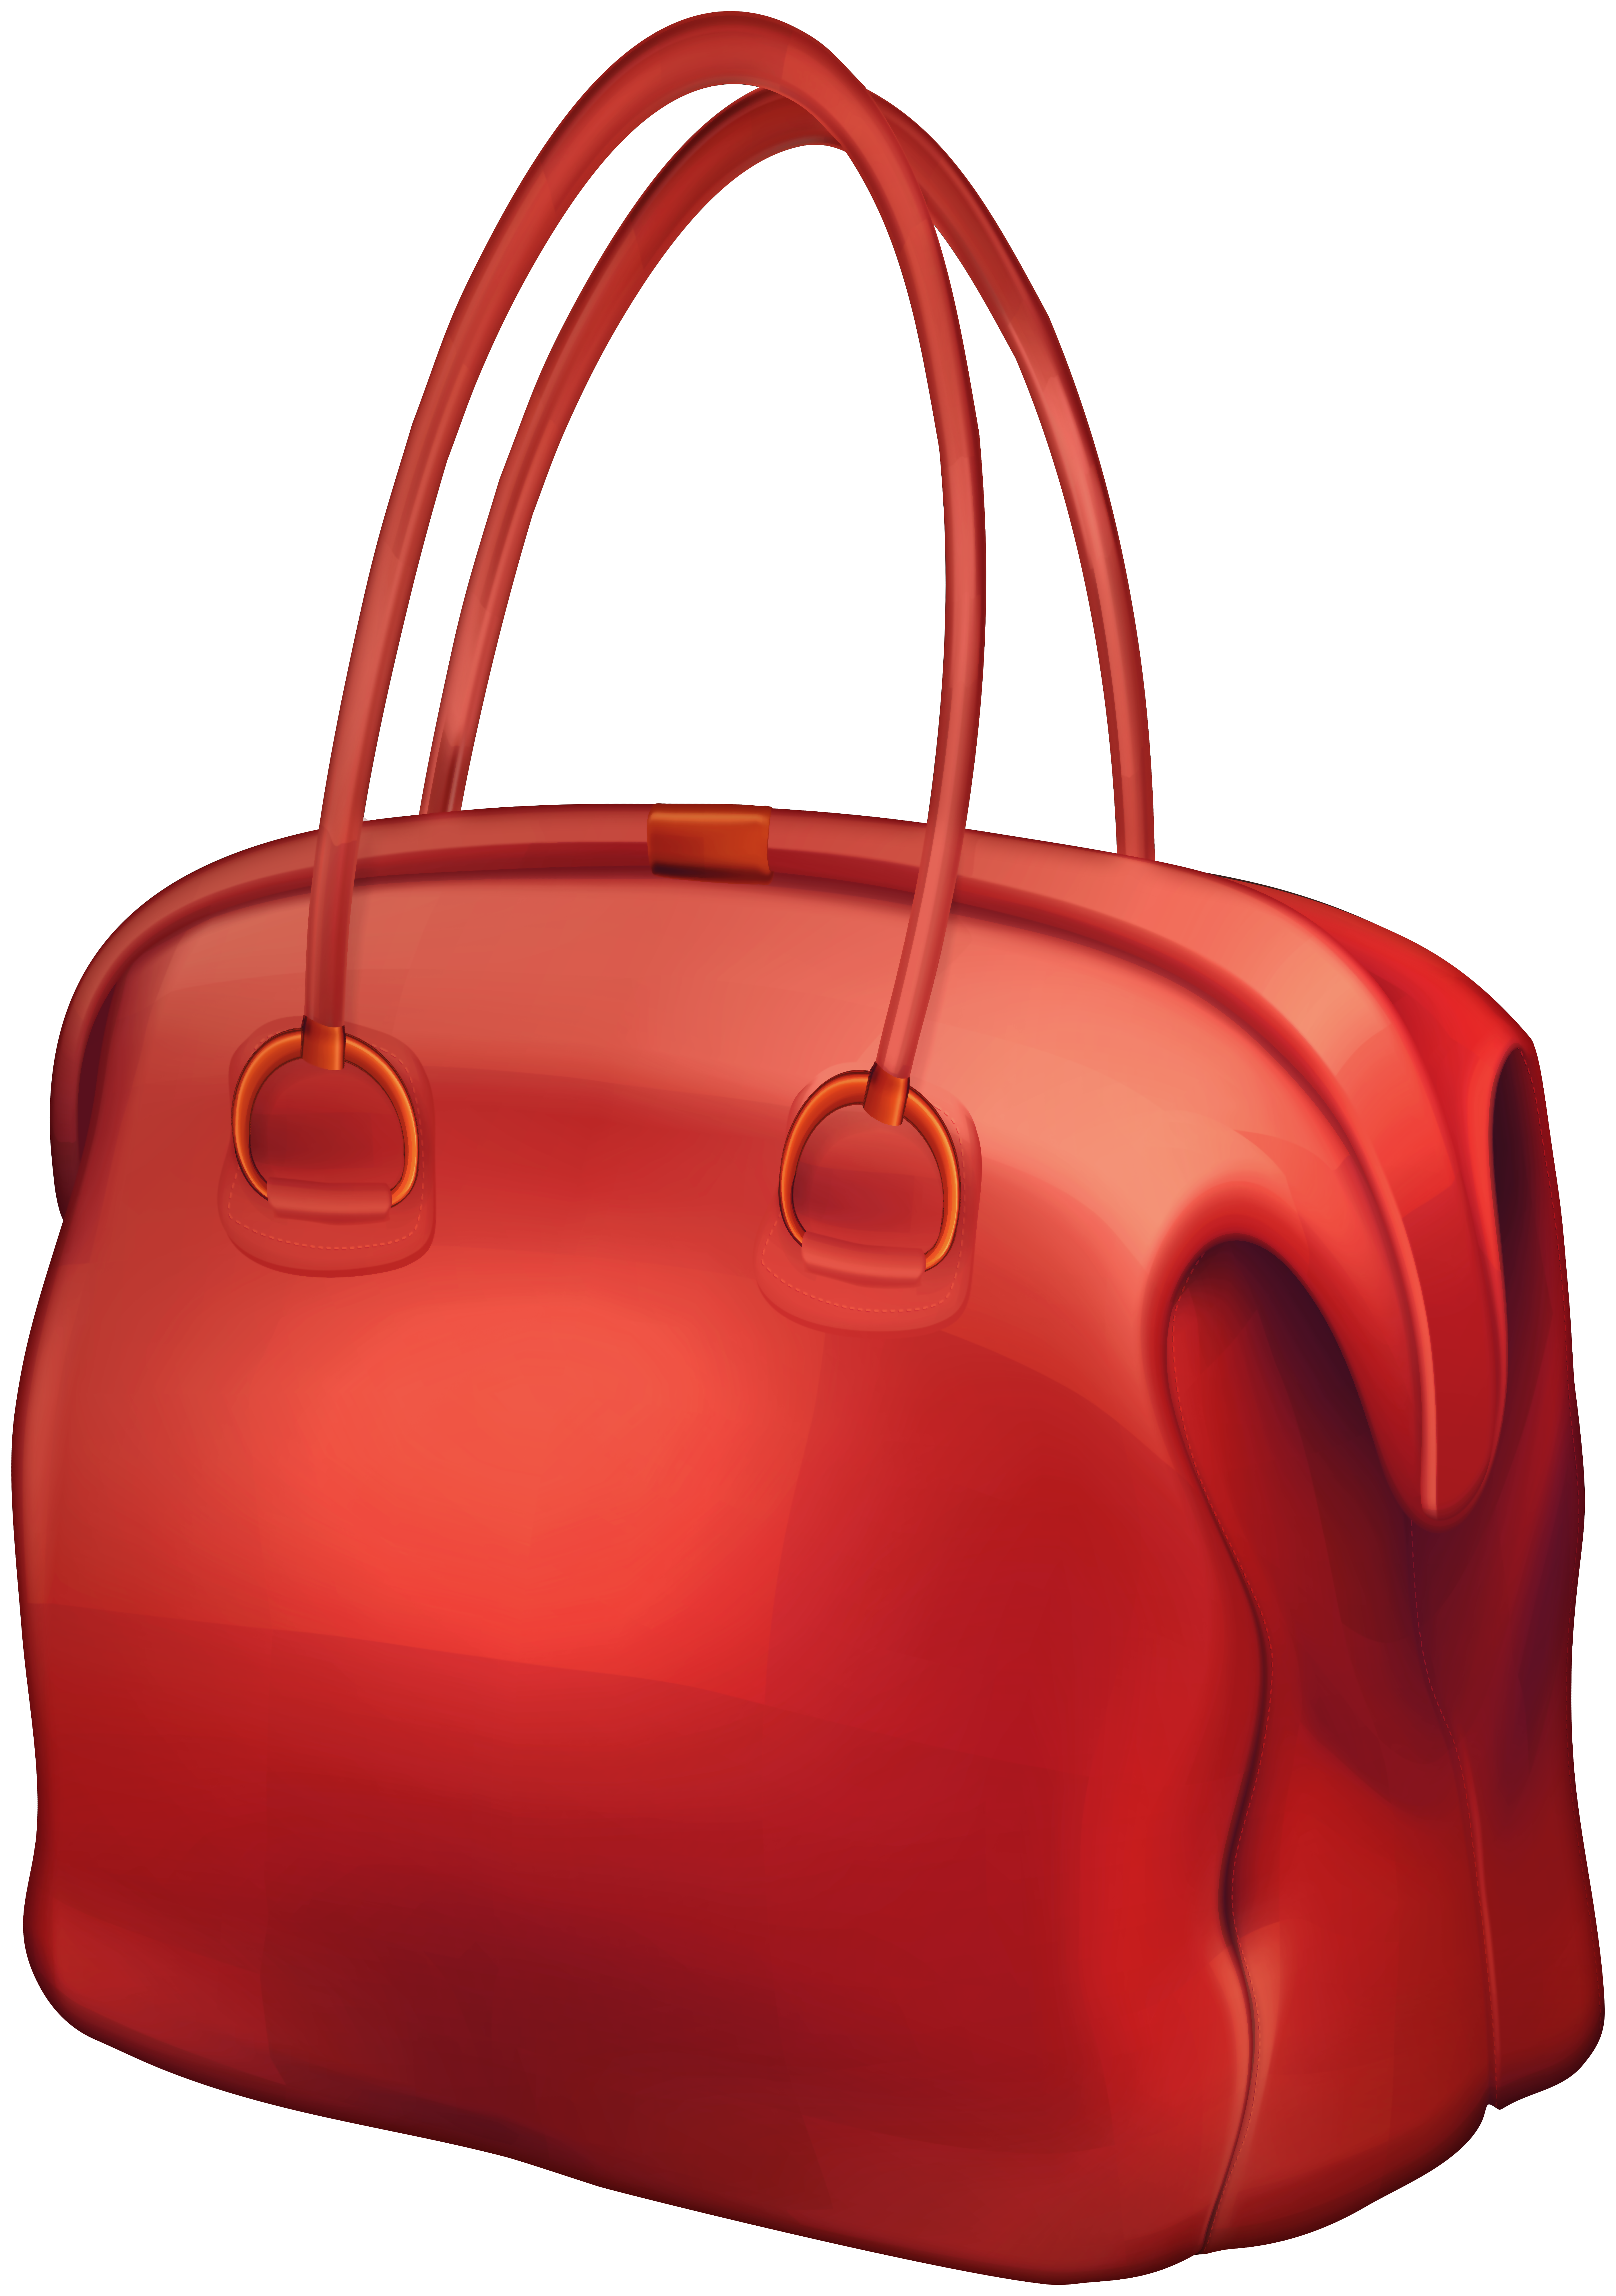 Say Hello - Barbi Bag Clipart - Free Transparent PNG Clipart Images Download